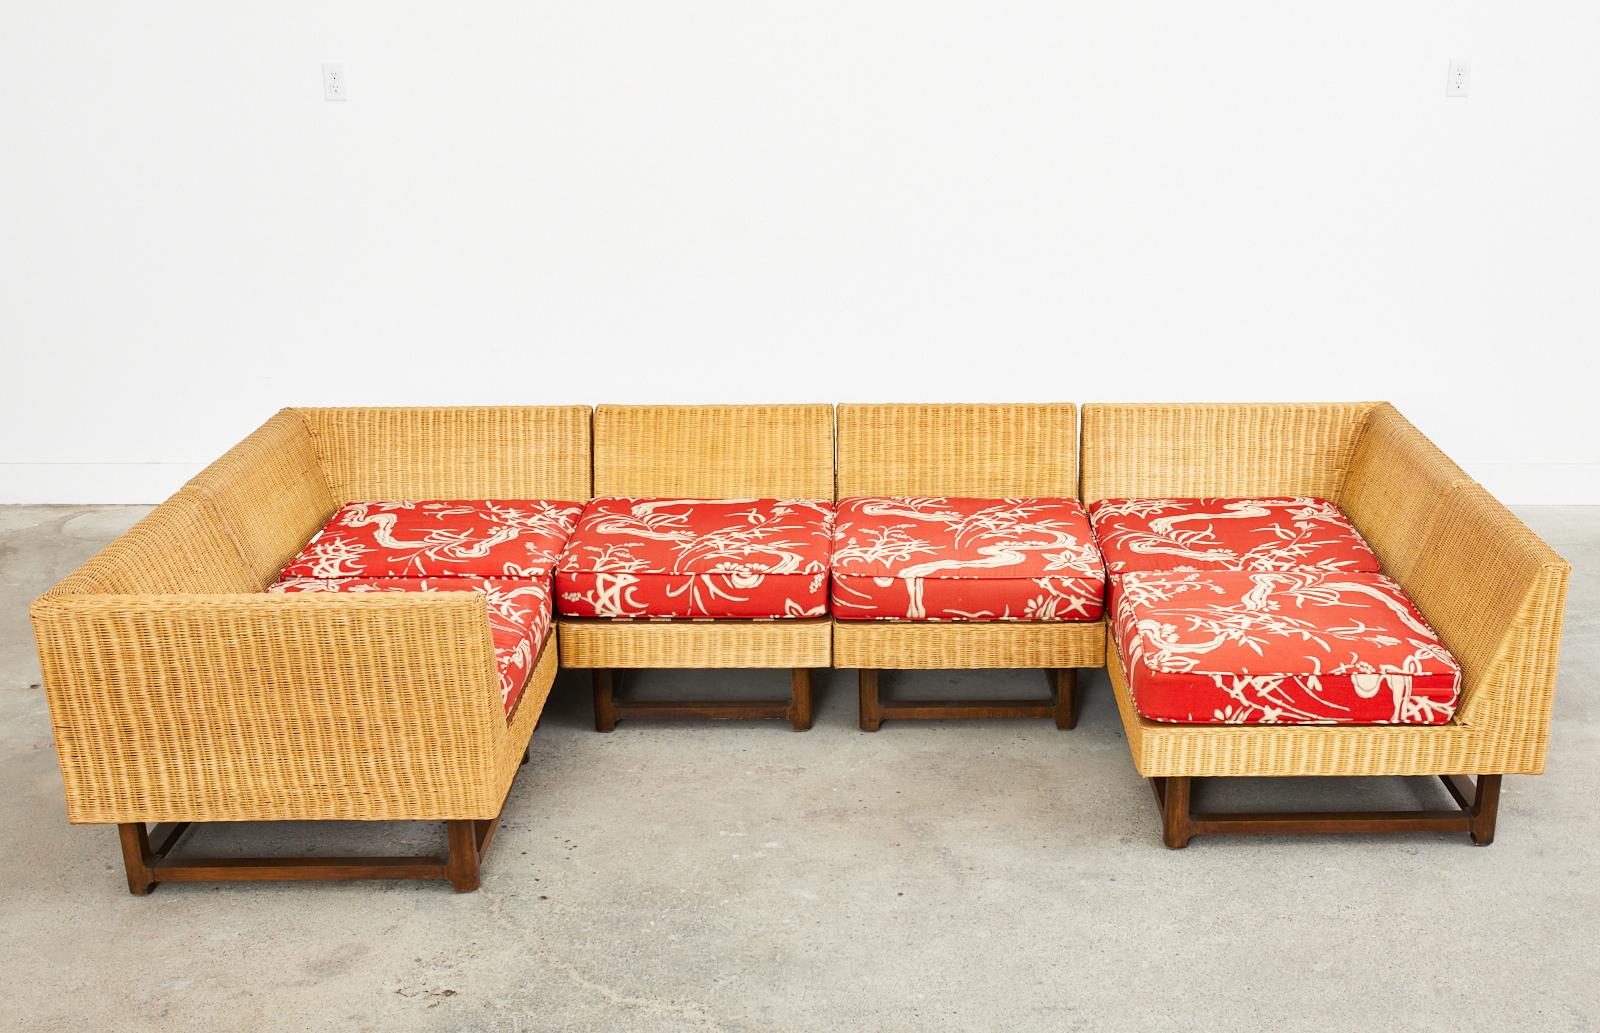 Rare MCM woven rattan wicker six-piece sectional sofa attributed to Paul Laszlo for Ficks Reed consisting of three corner elements measuring 32.5